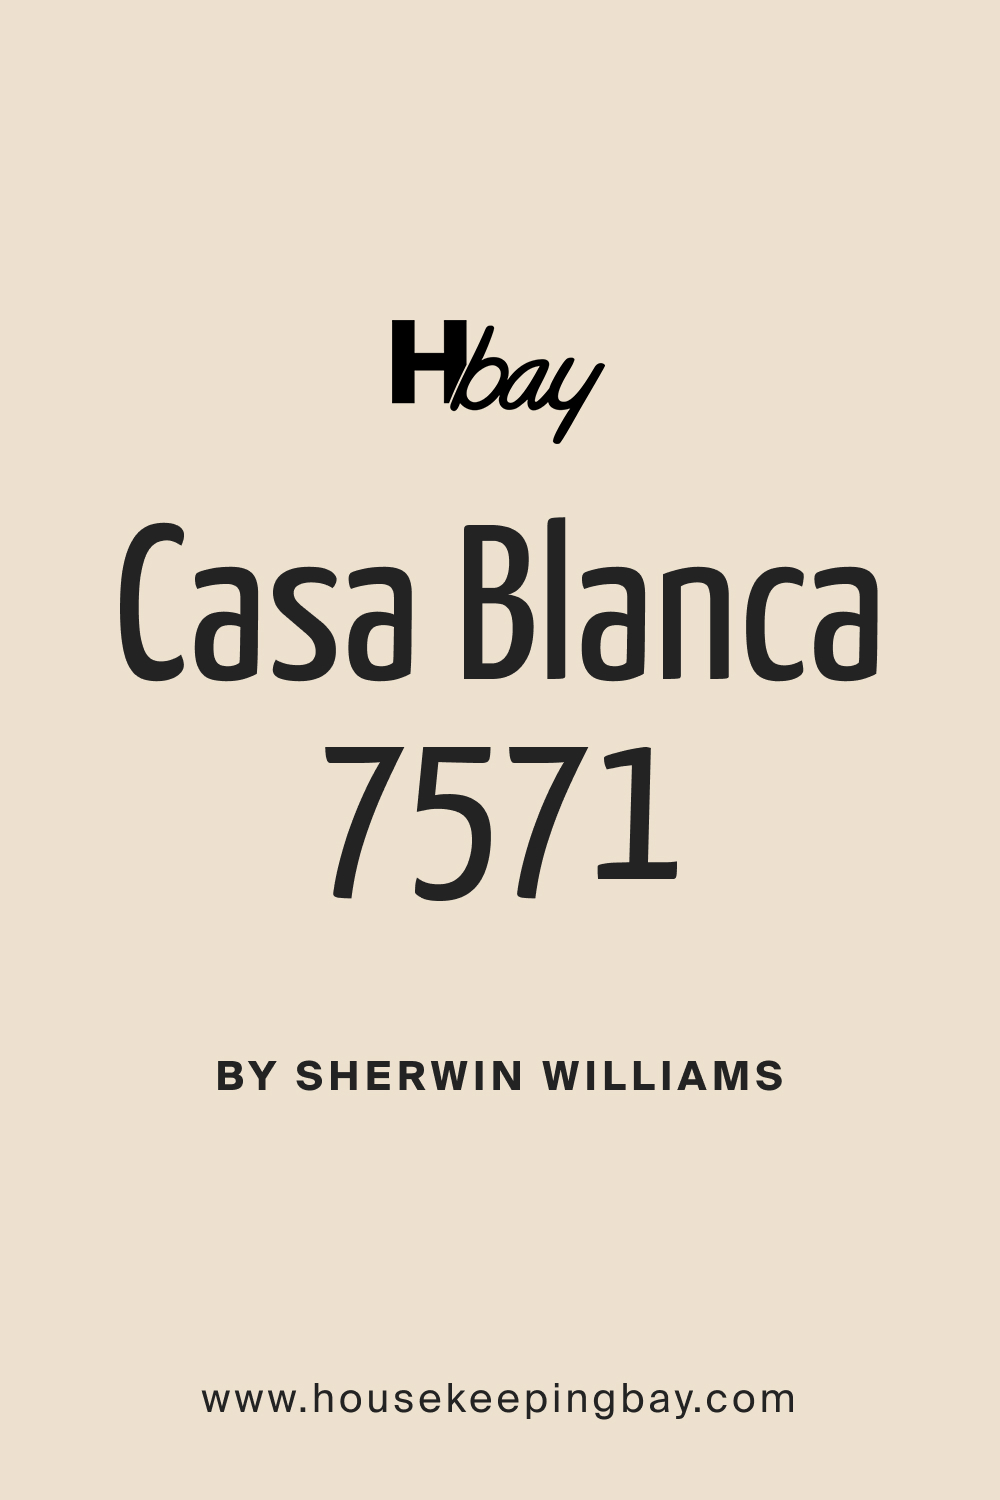 Casa Blanca 7571 Paint Color by Sherwin Williams